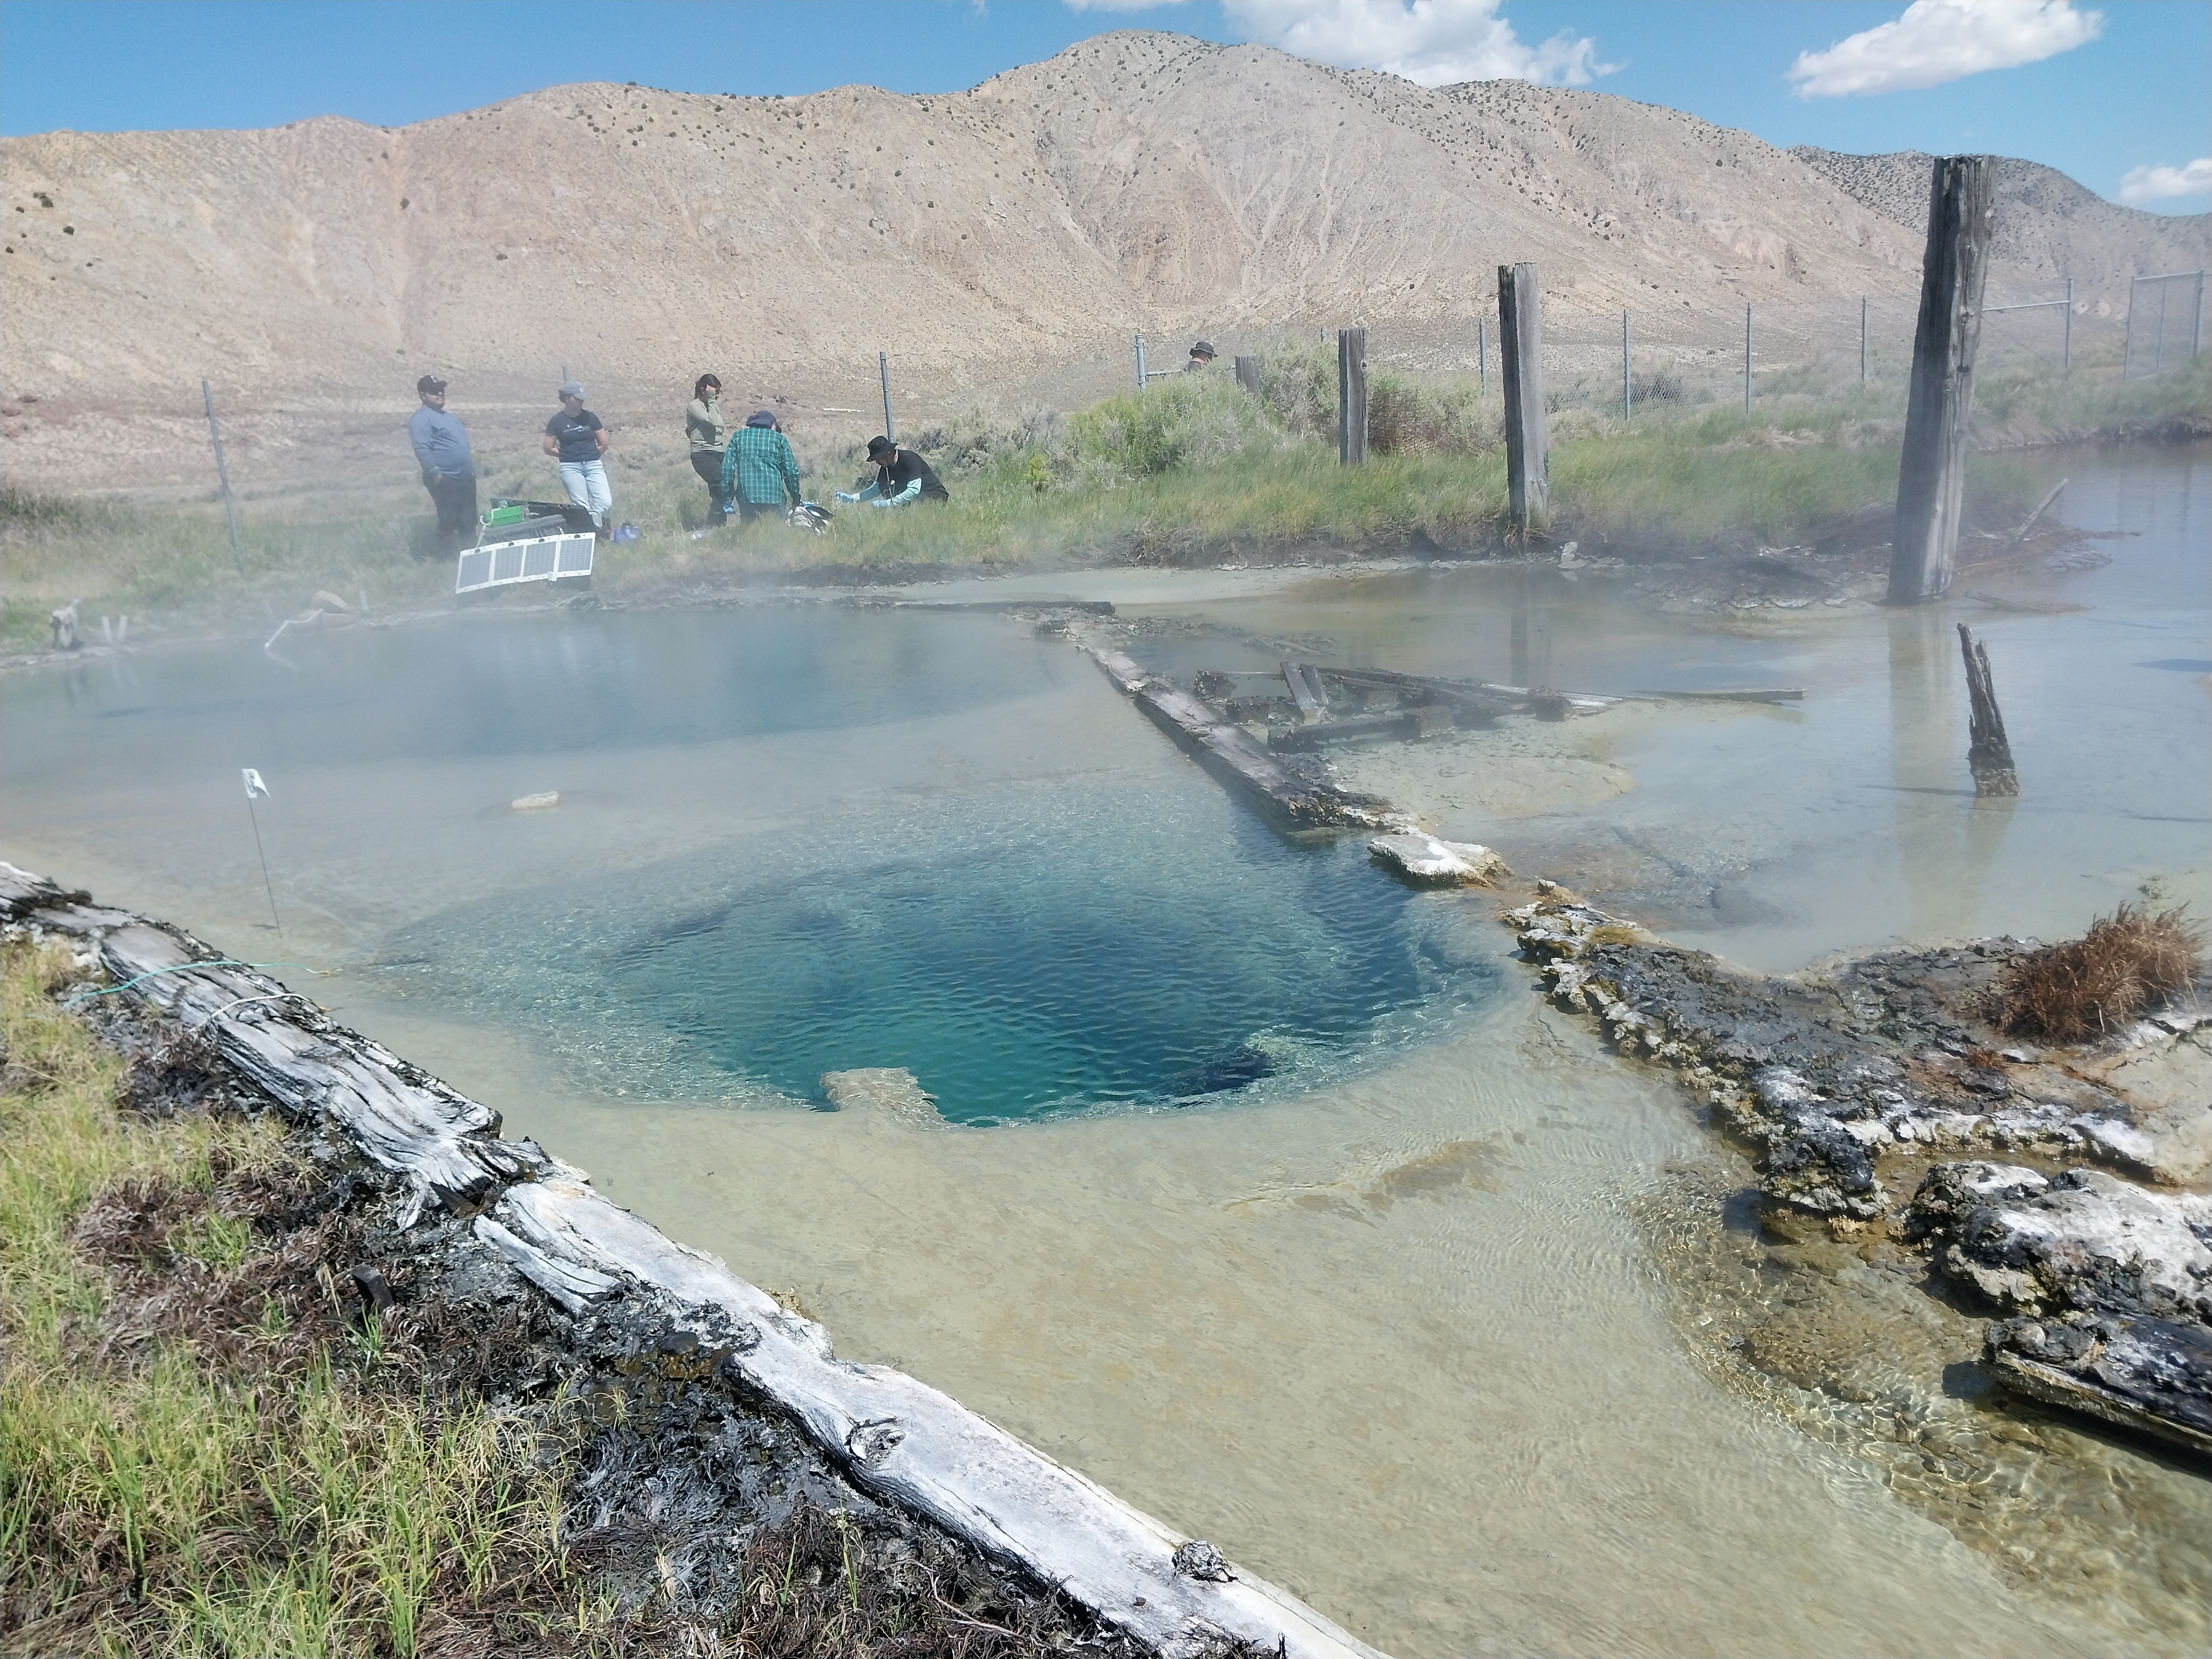 A photo of Great Boiling Spring in the forefront with mountains in the background.